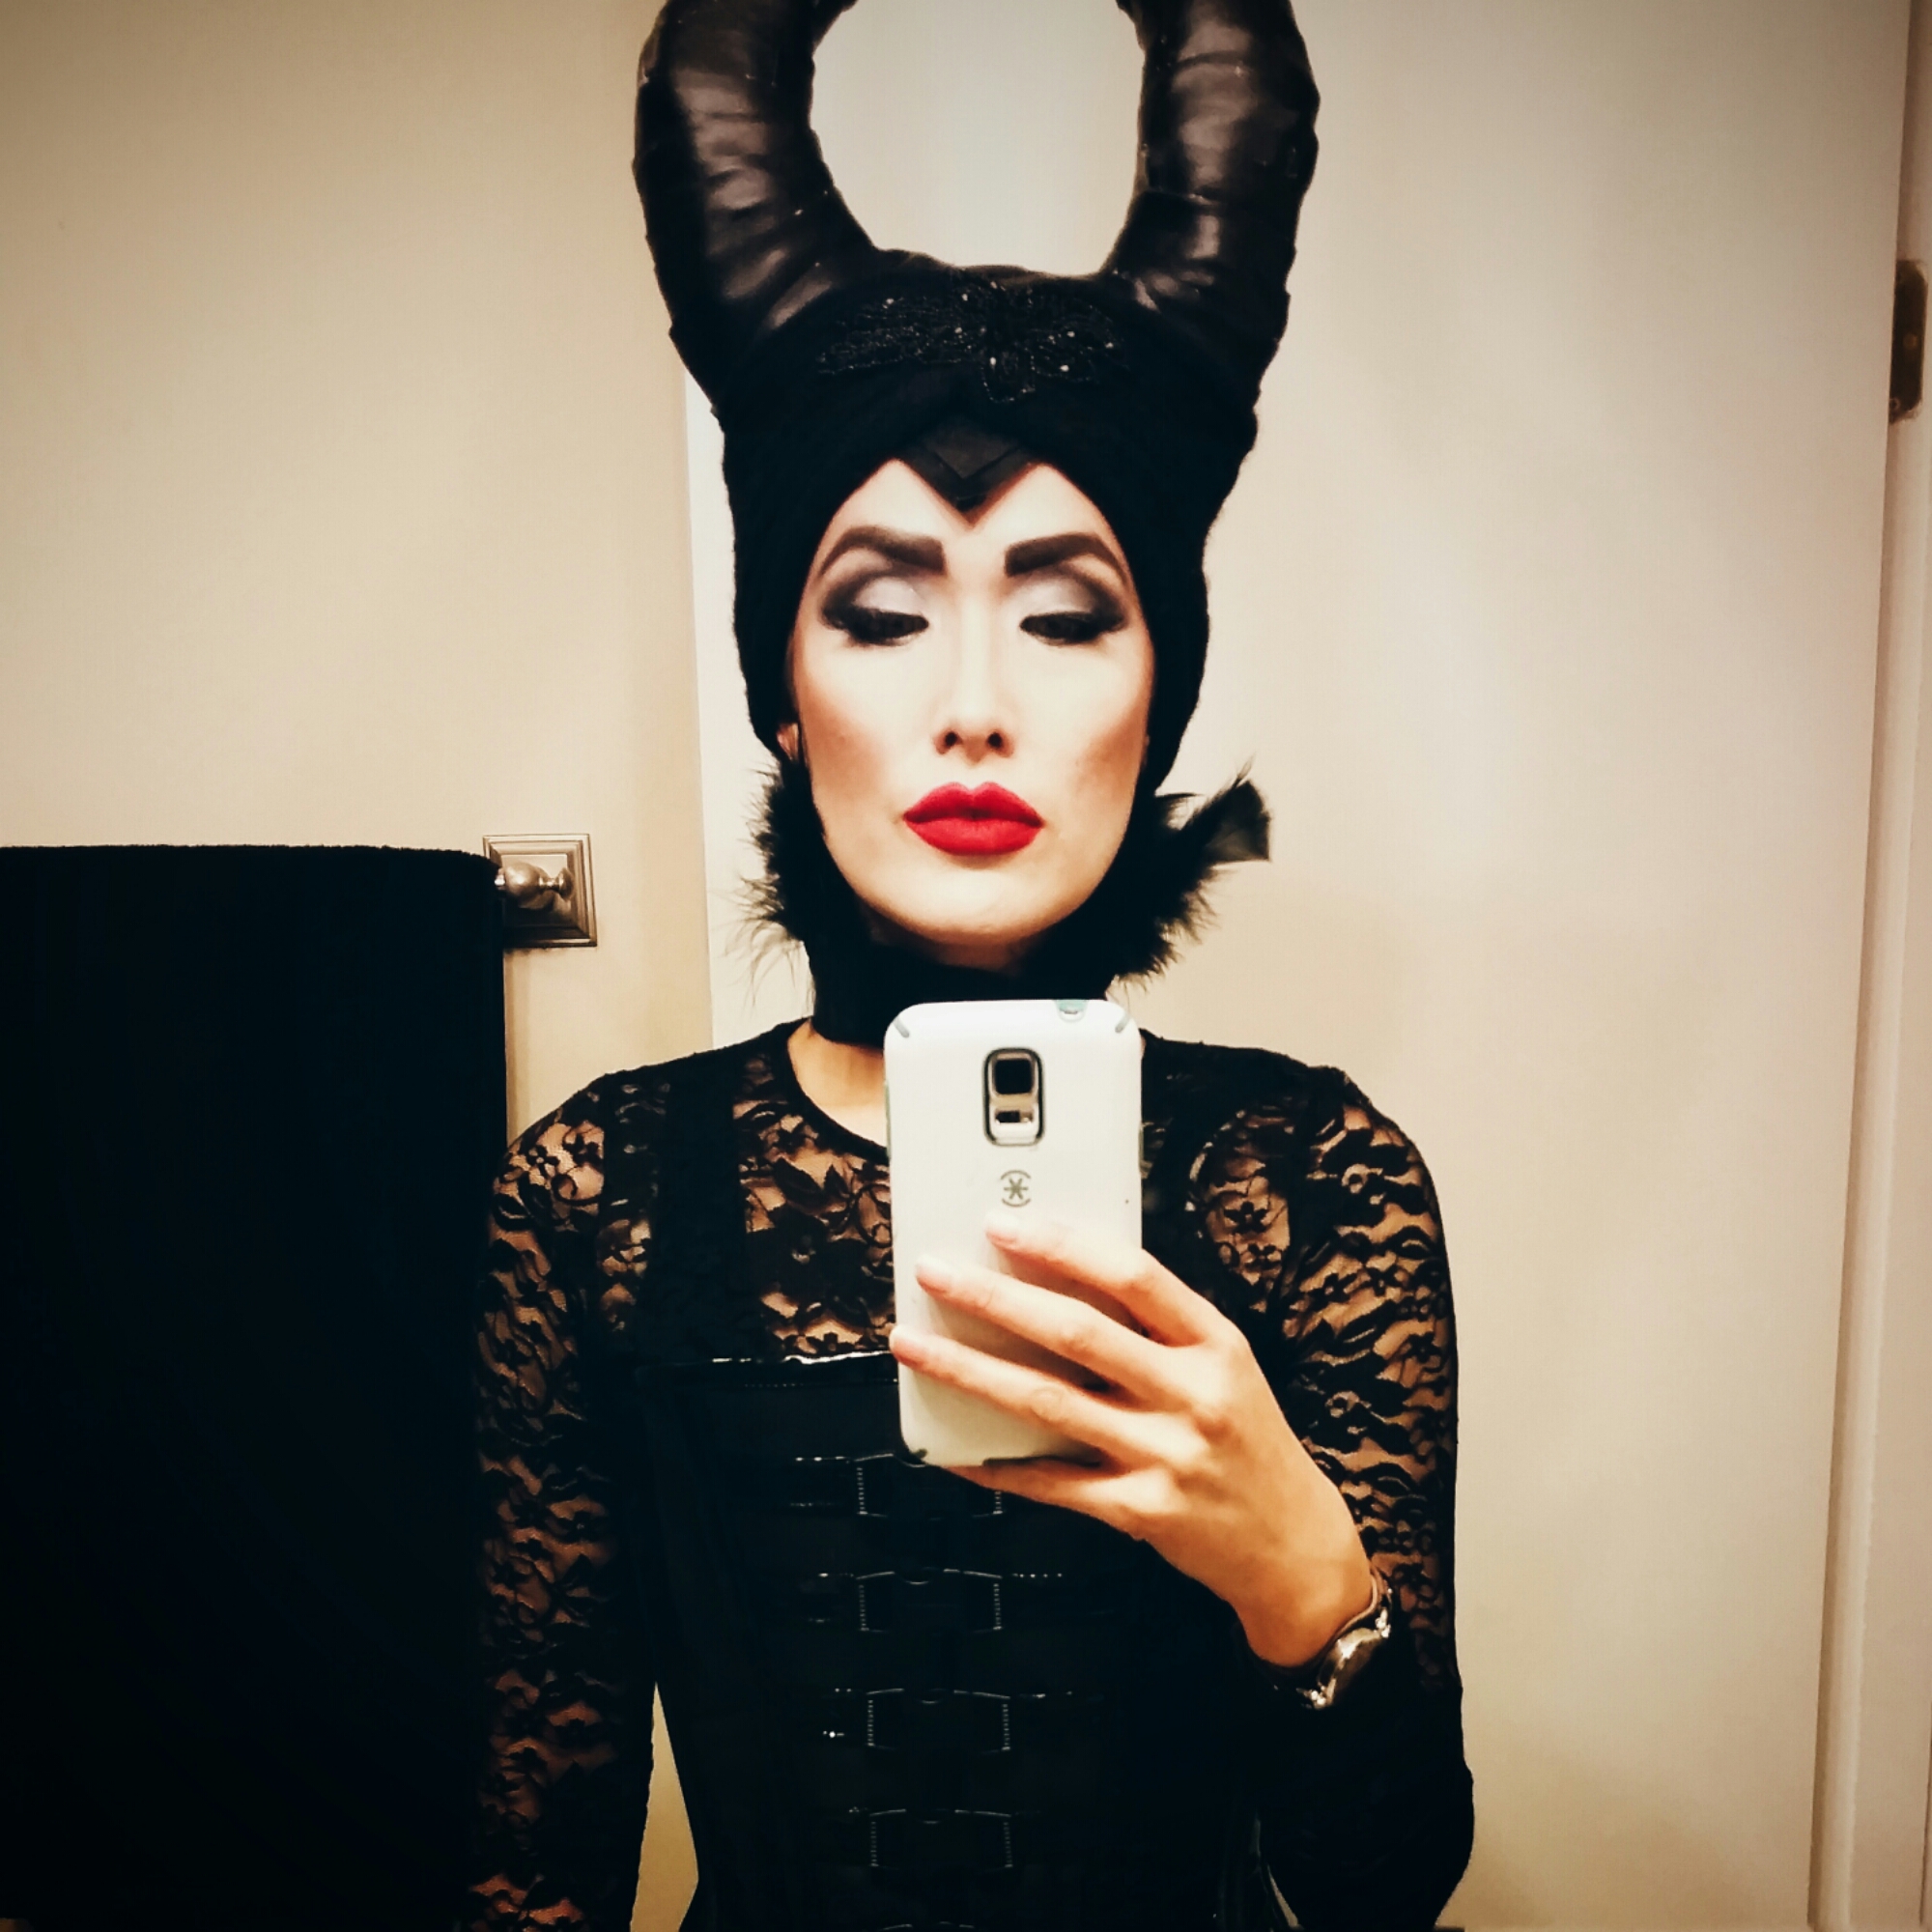 Maleficent costume with rave